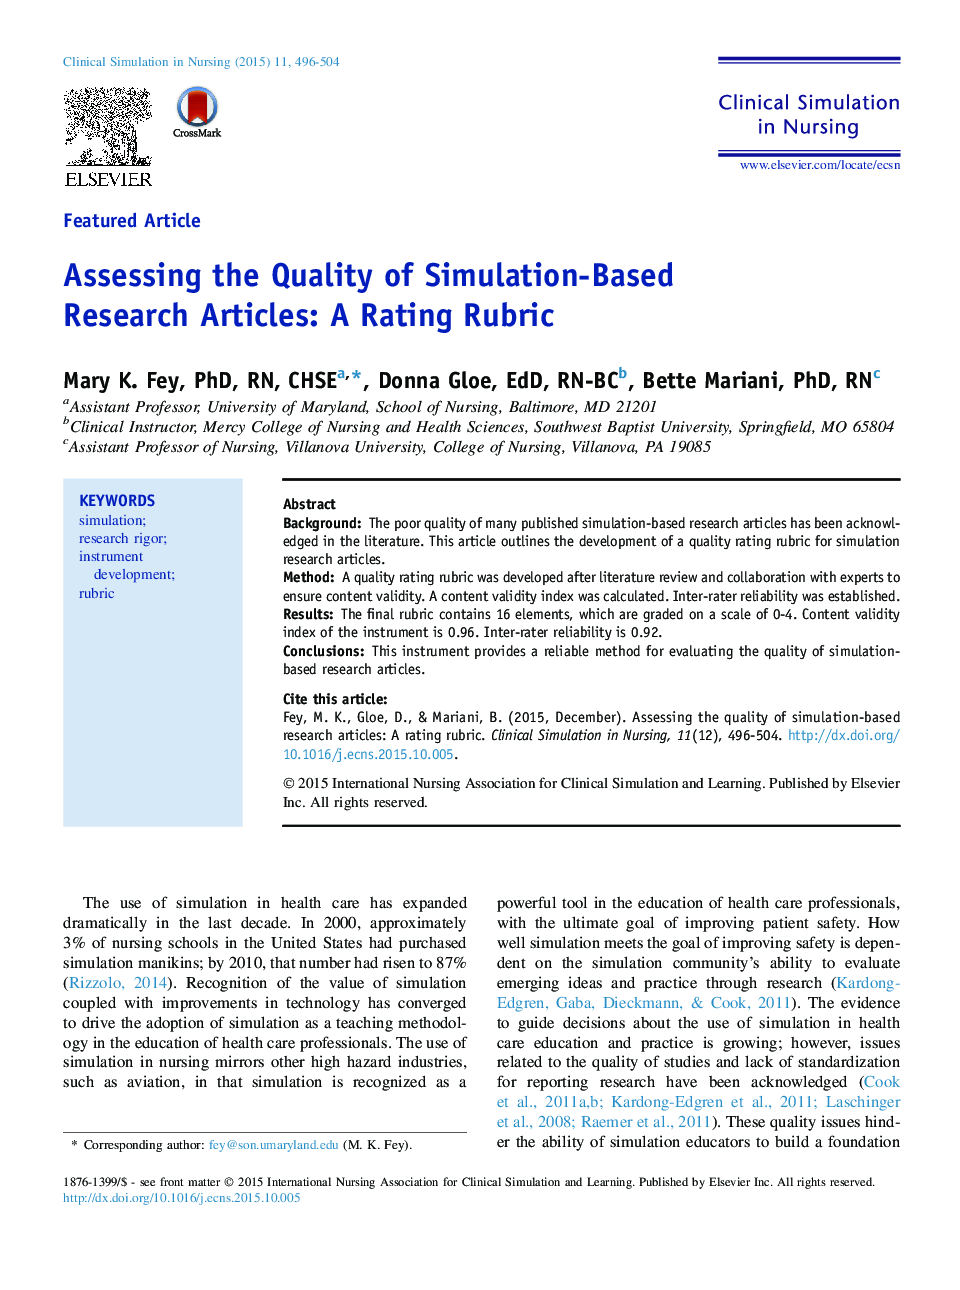 Assessing the Quality of Simulation-Based Research Articles: A Rating Rubric